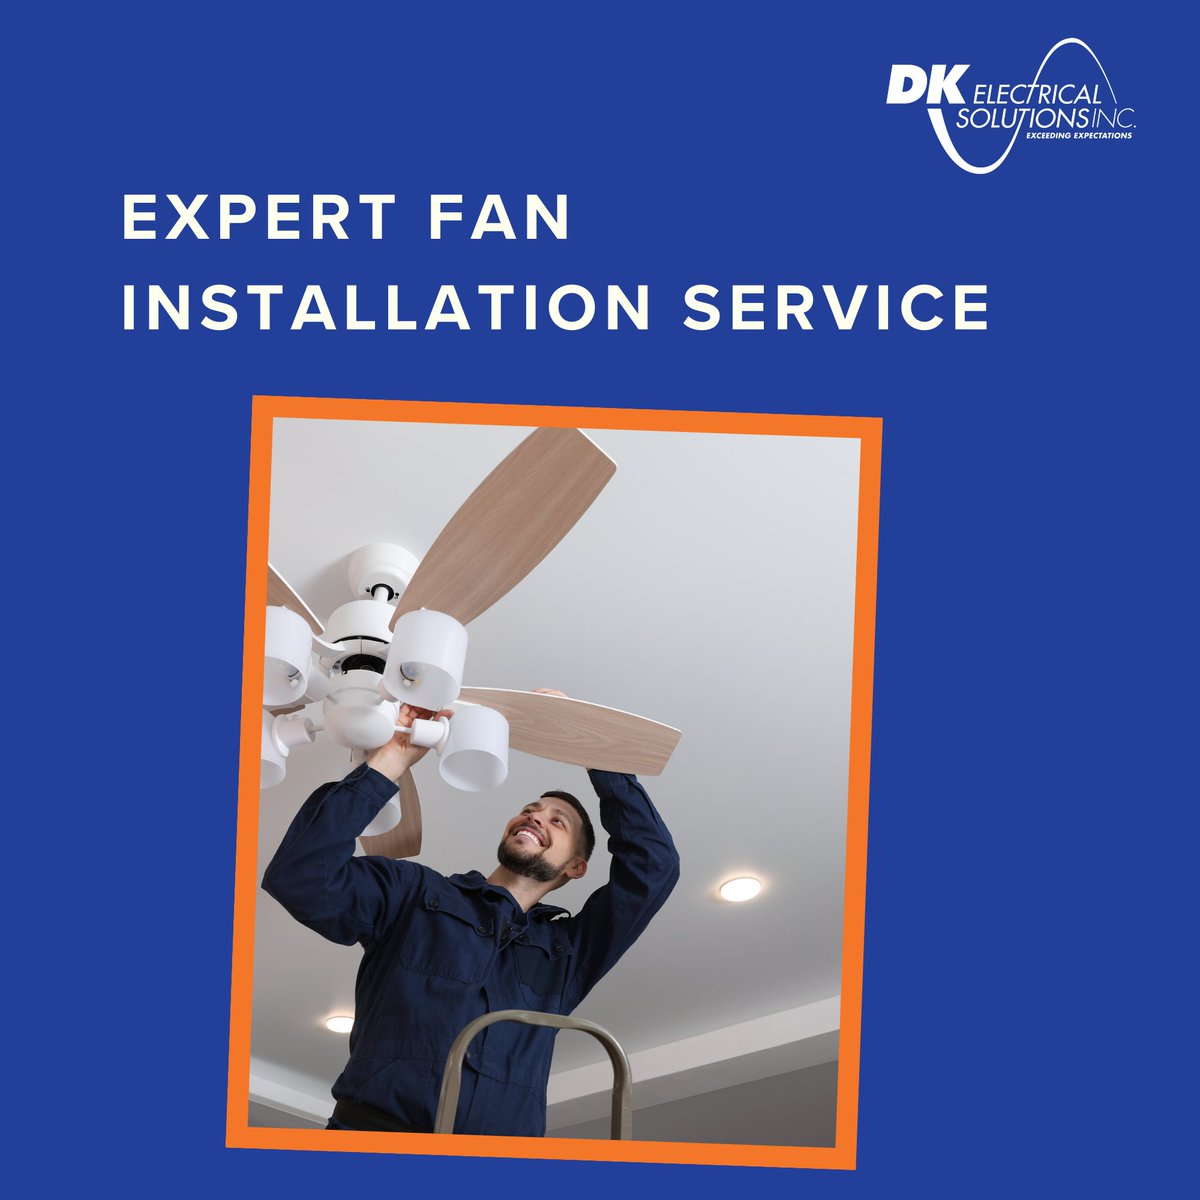 Our installation services make a difference! Just ask our satisfied customer Jane: 'Quick, clean, and professional! 💬🌬️
bit.ly/3gqqrLm 

#CustomerTestimonial #SatisfiedCustomer